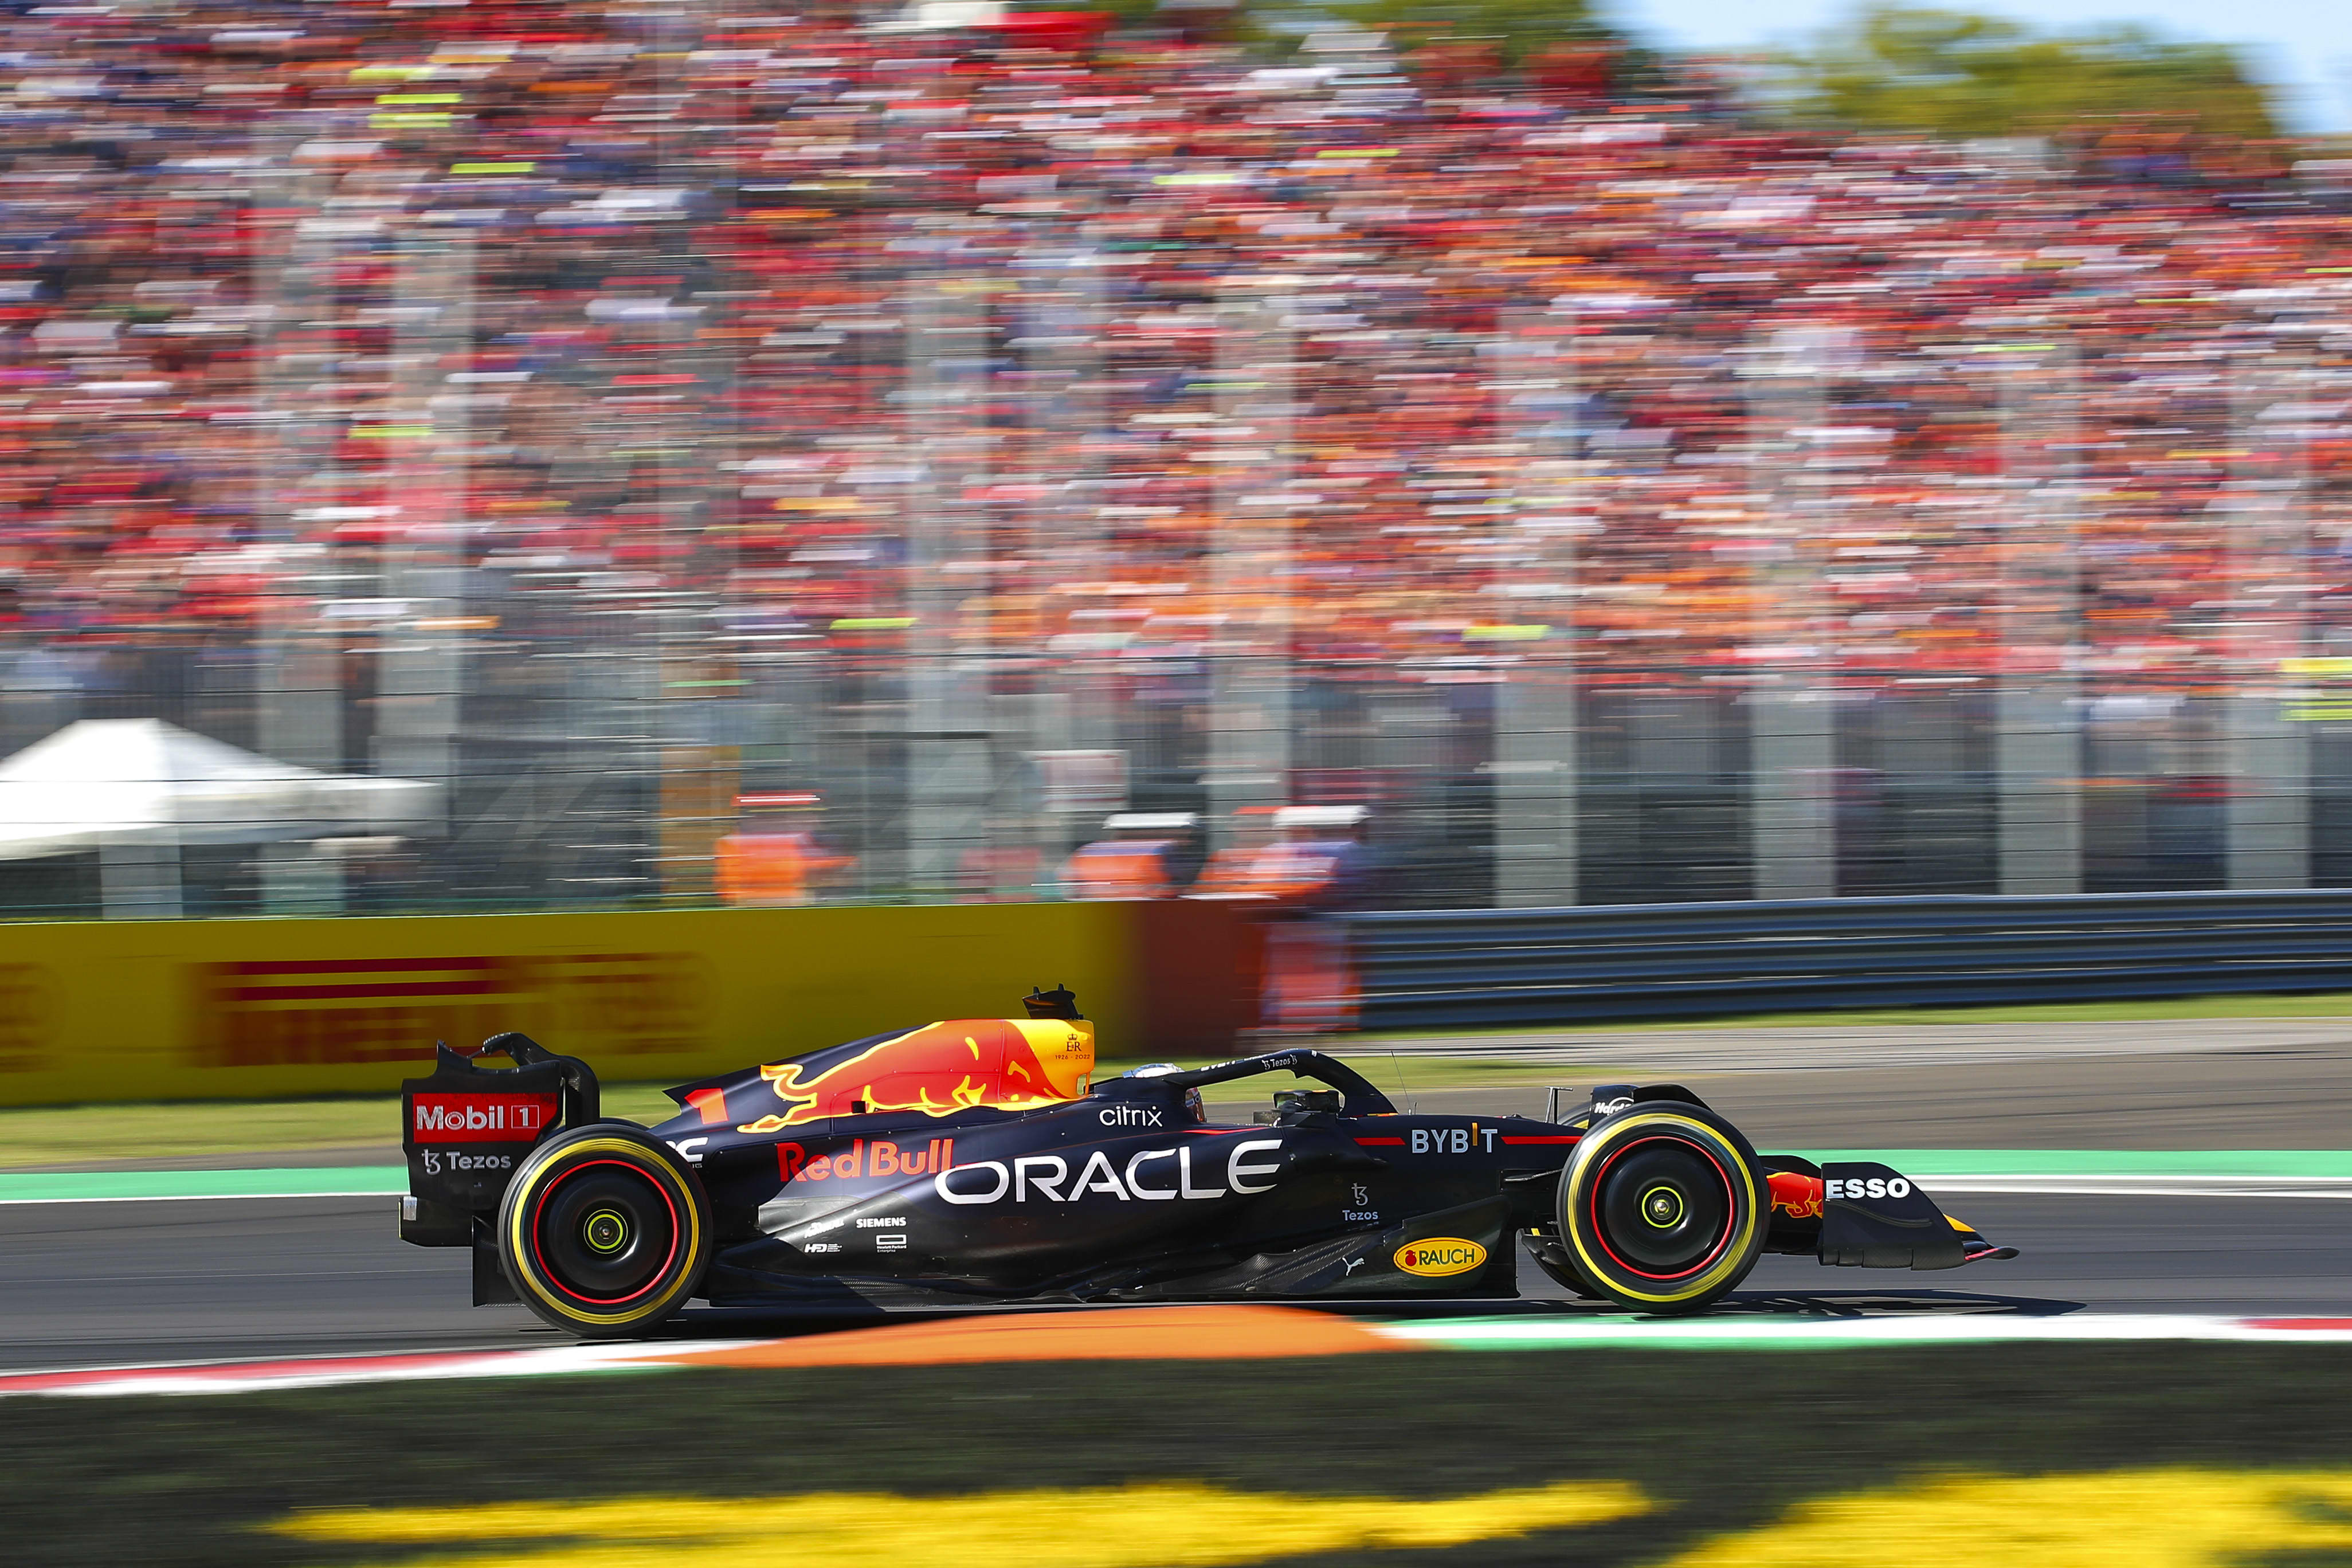 CNBC documentary 'Inside Track' will explore Formula One's business side -  NBC Sports